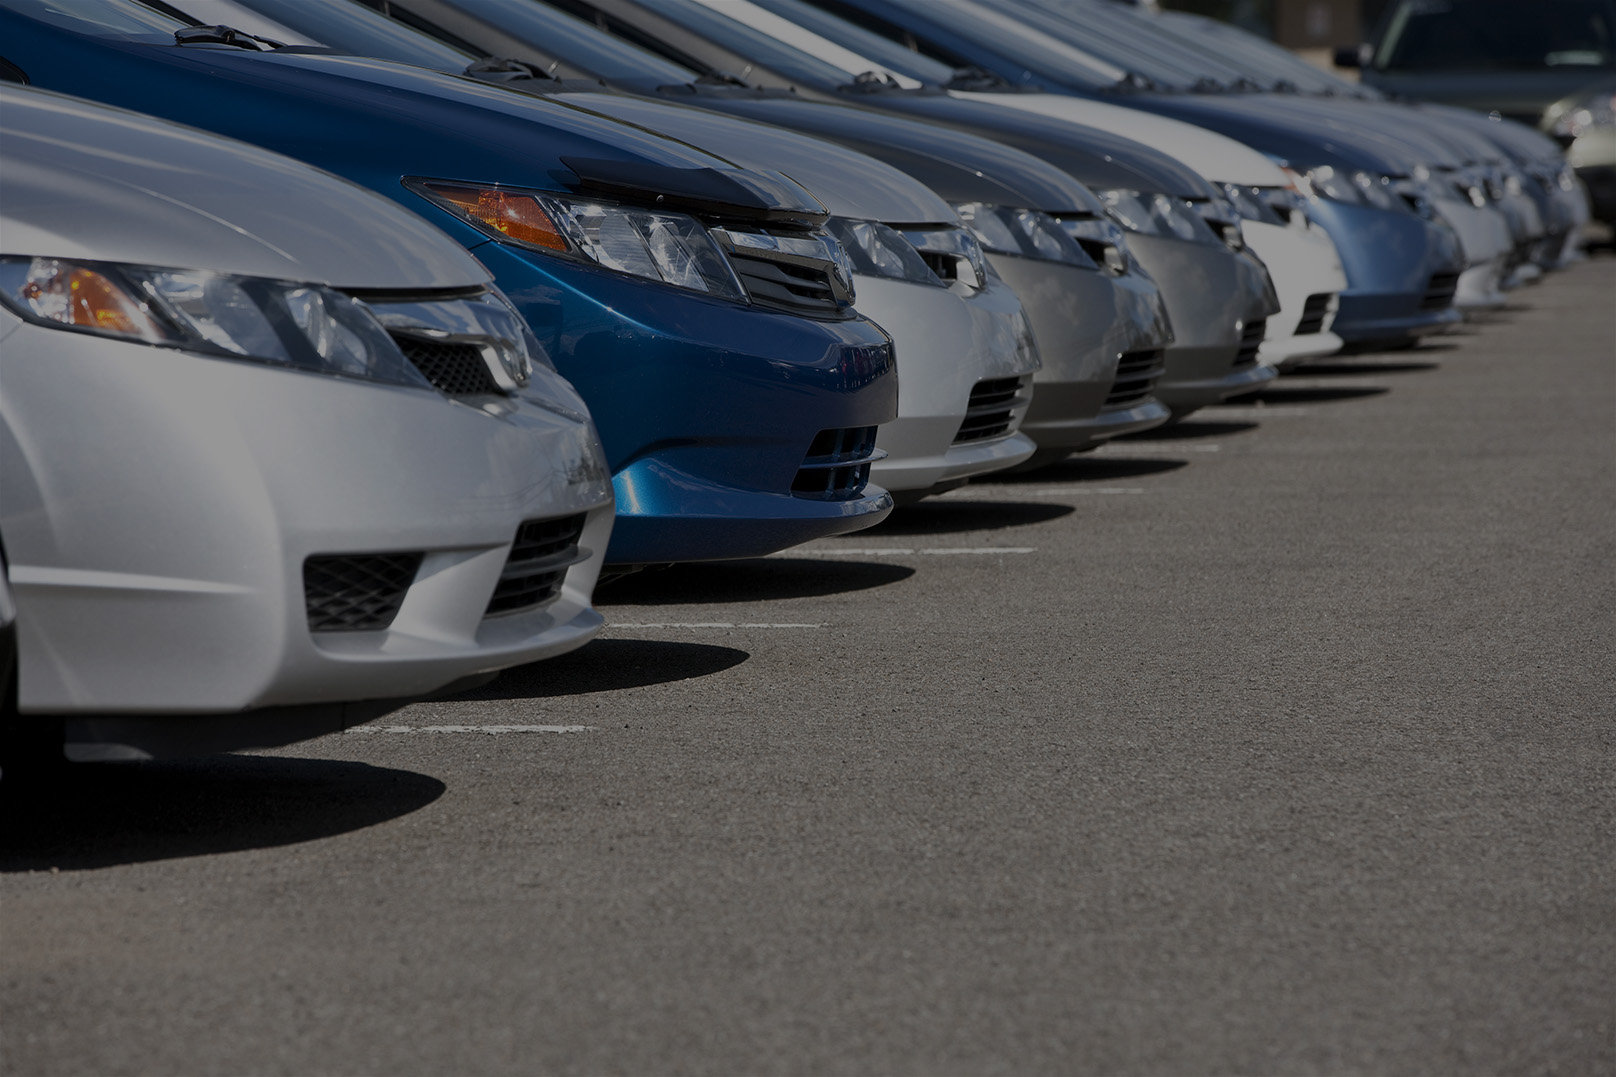 Line Of New Compact Cars At Dealership Dominion Dealer Solutions